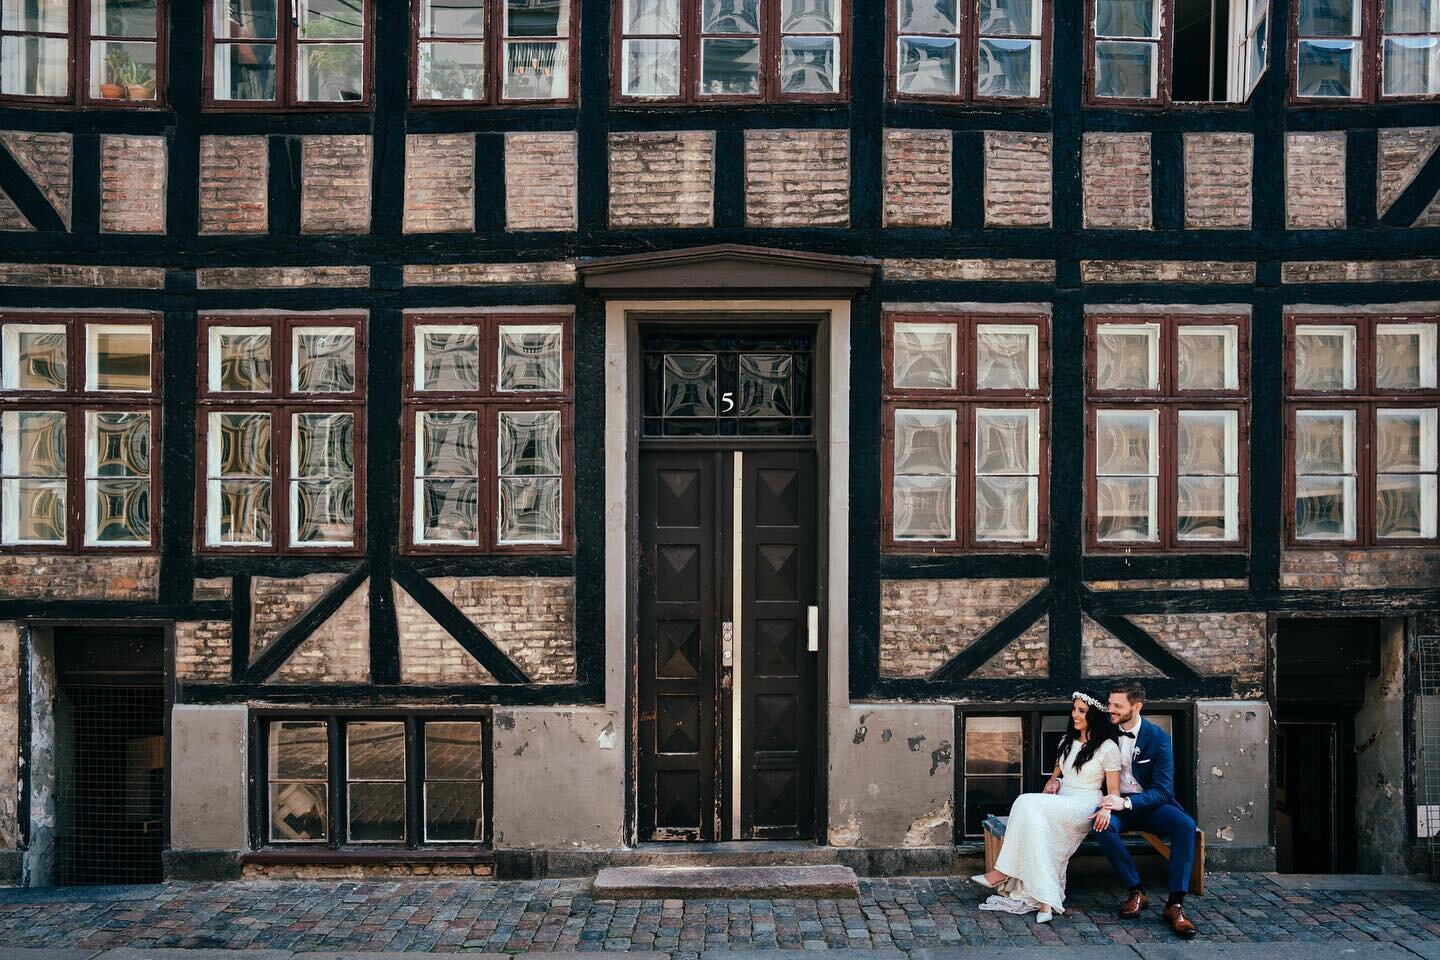 Throwback to @simonpfister__ &amp; @hagarpfister &lsquo;s elopement in 2020. 
Can&rsquo;t wait for the summer to hit Copenhagen so I can get out meeting more incredible people with my camera in hand 🥳

#sonyimages #sonyalpha #nordicweddingcollective